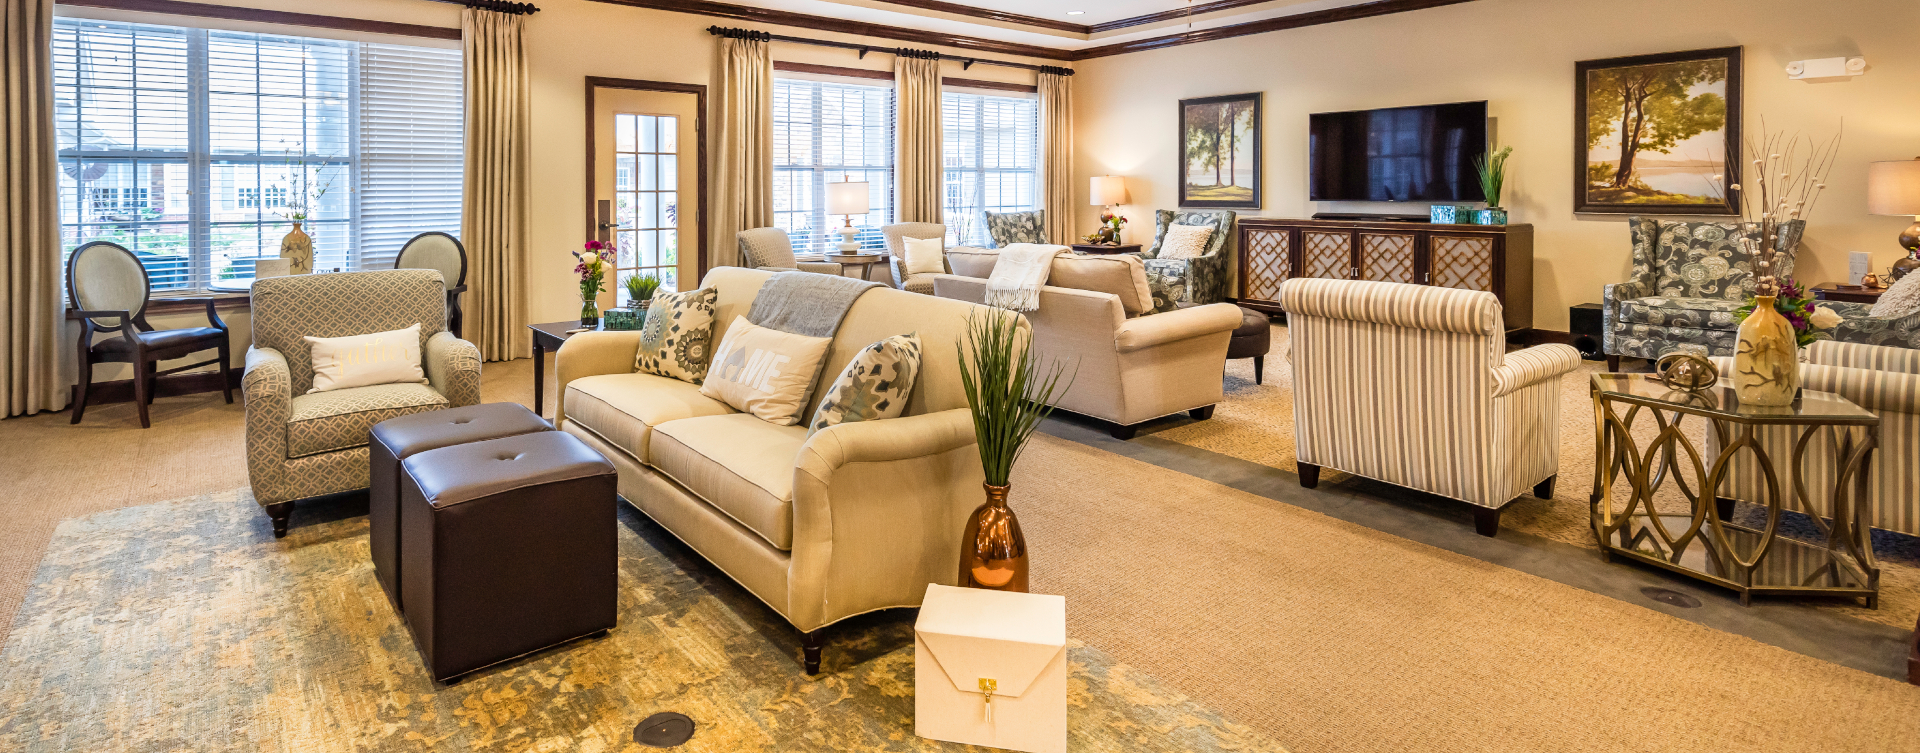 Snooze in your favorite chair in the living room at Bickford of Shelby Township